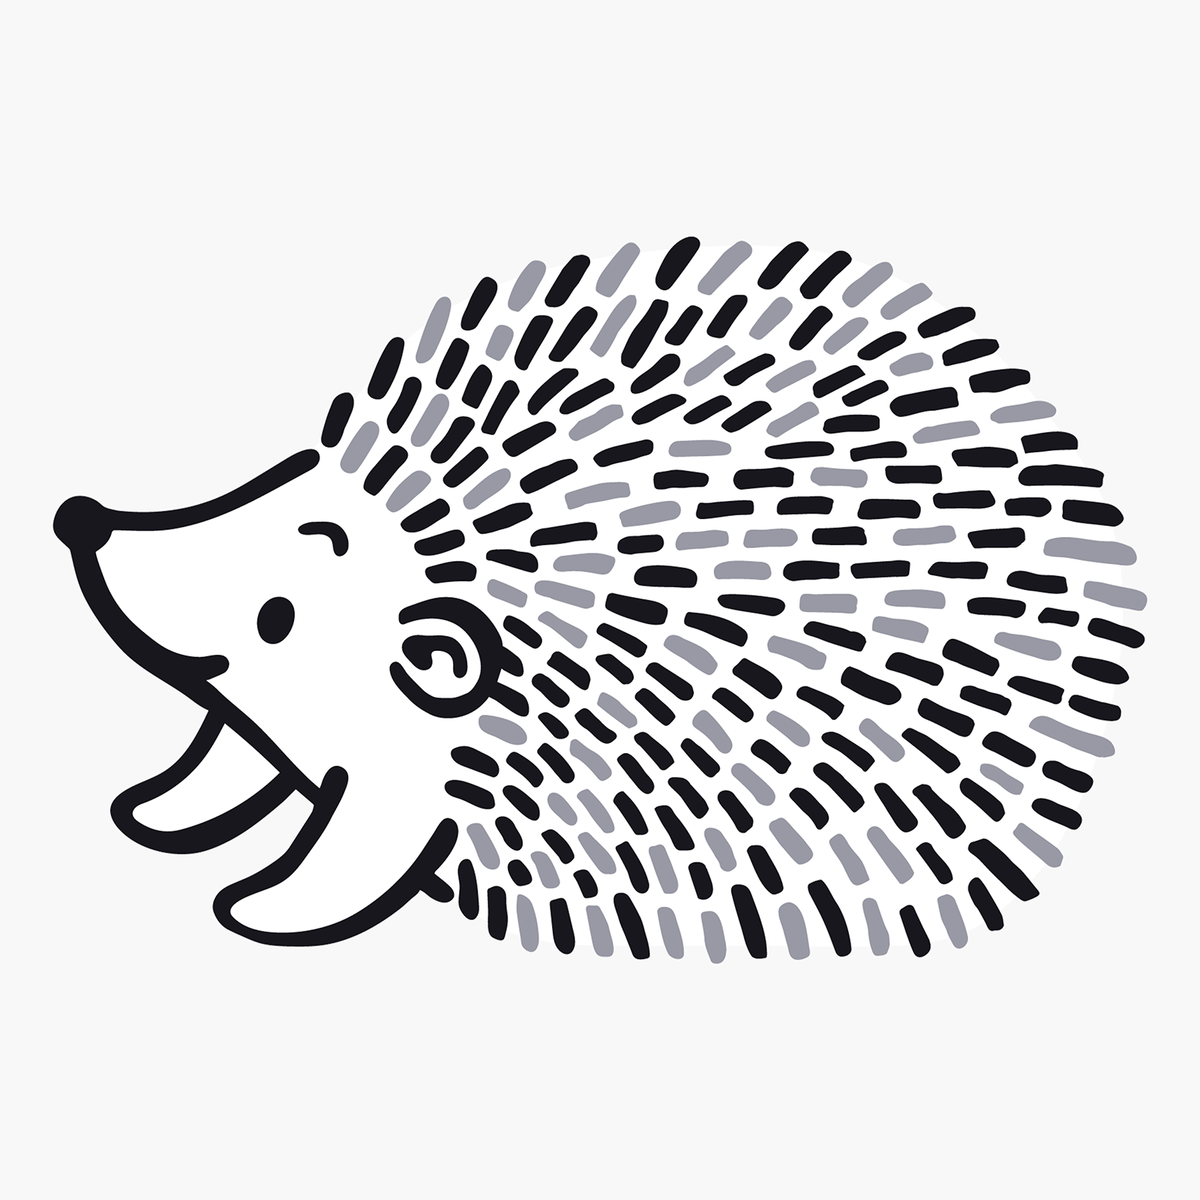 Hedgehog drawing free download on ayoqq cliparts